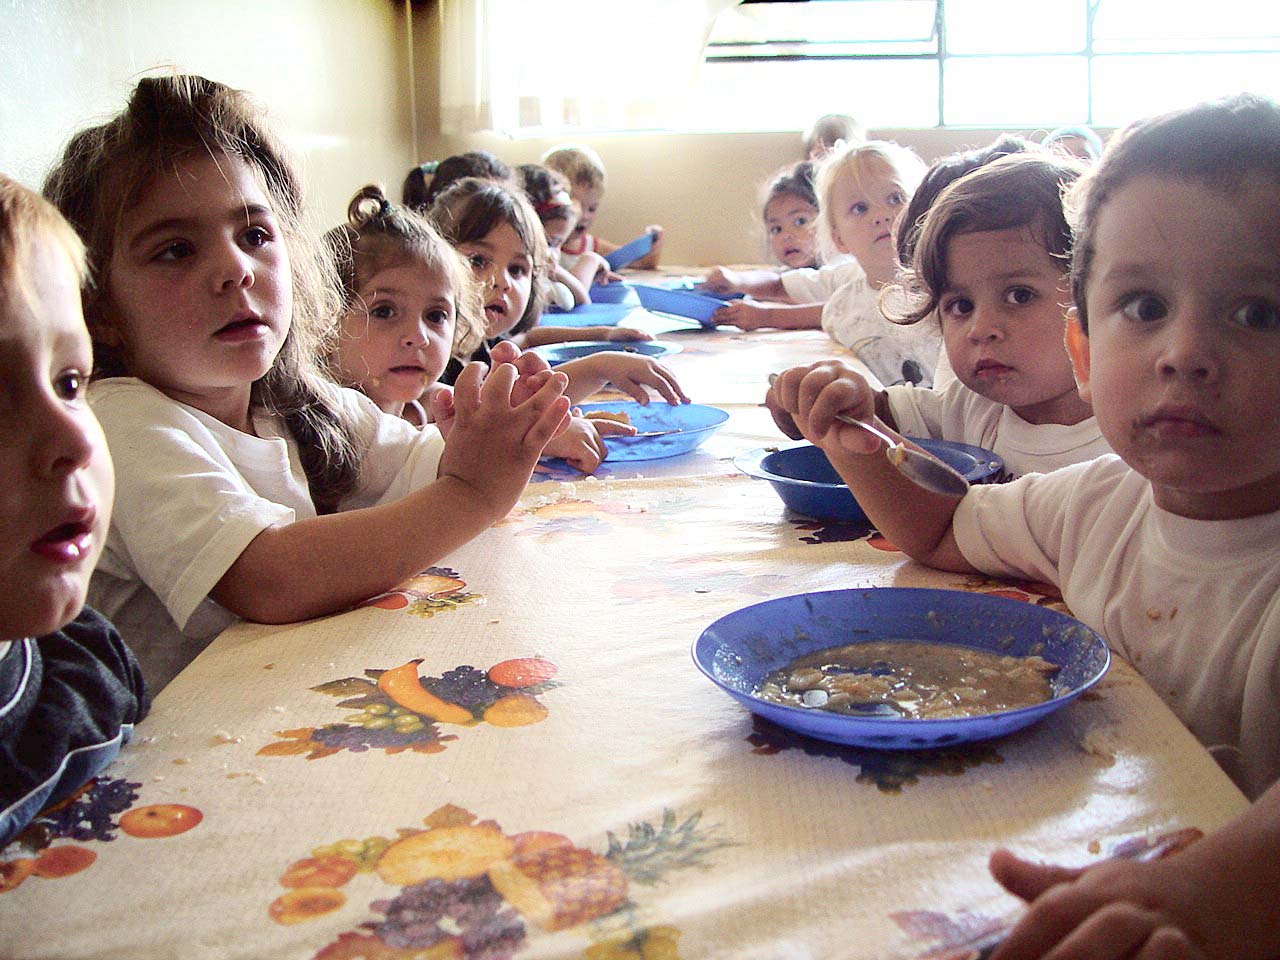 several children are sitting at a table and eating